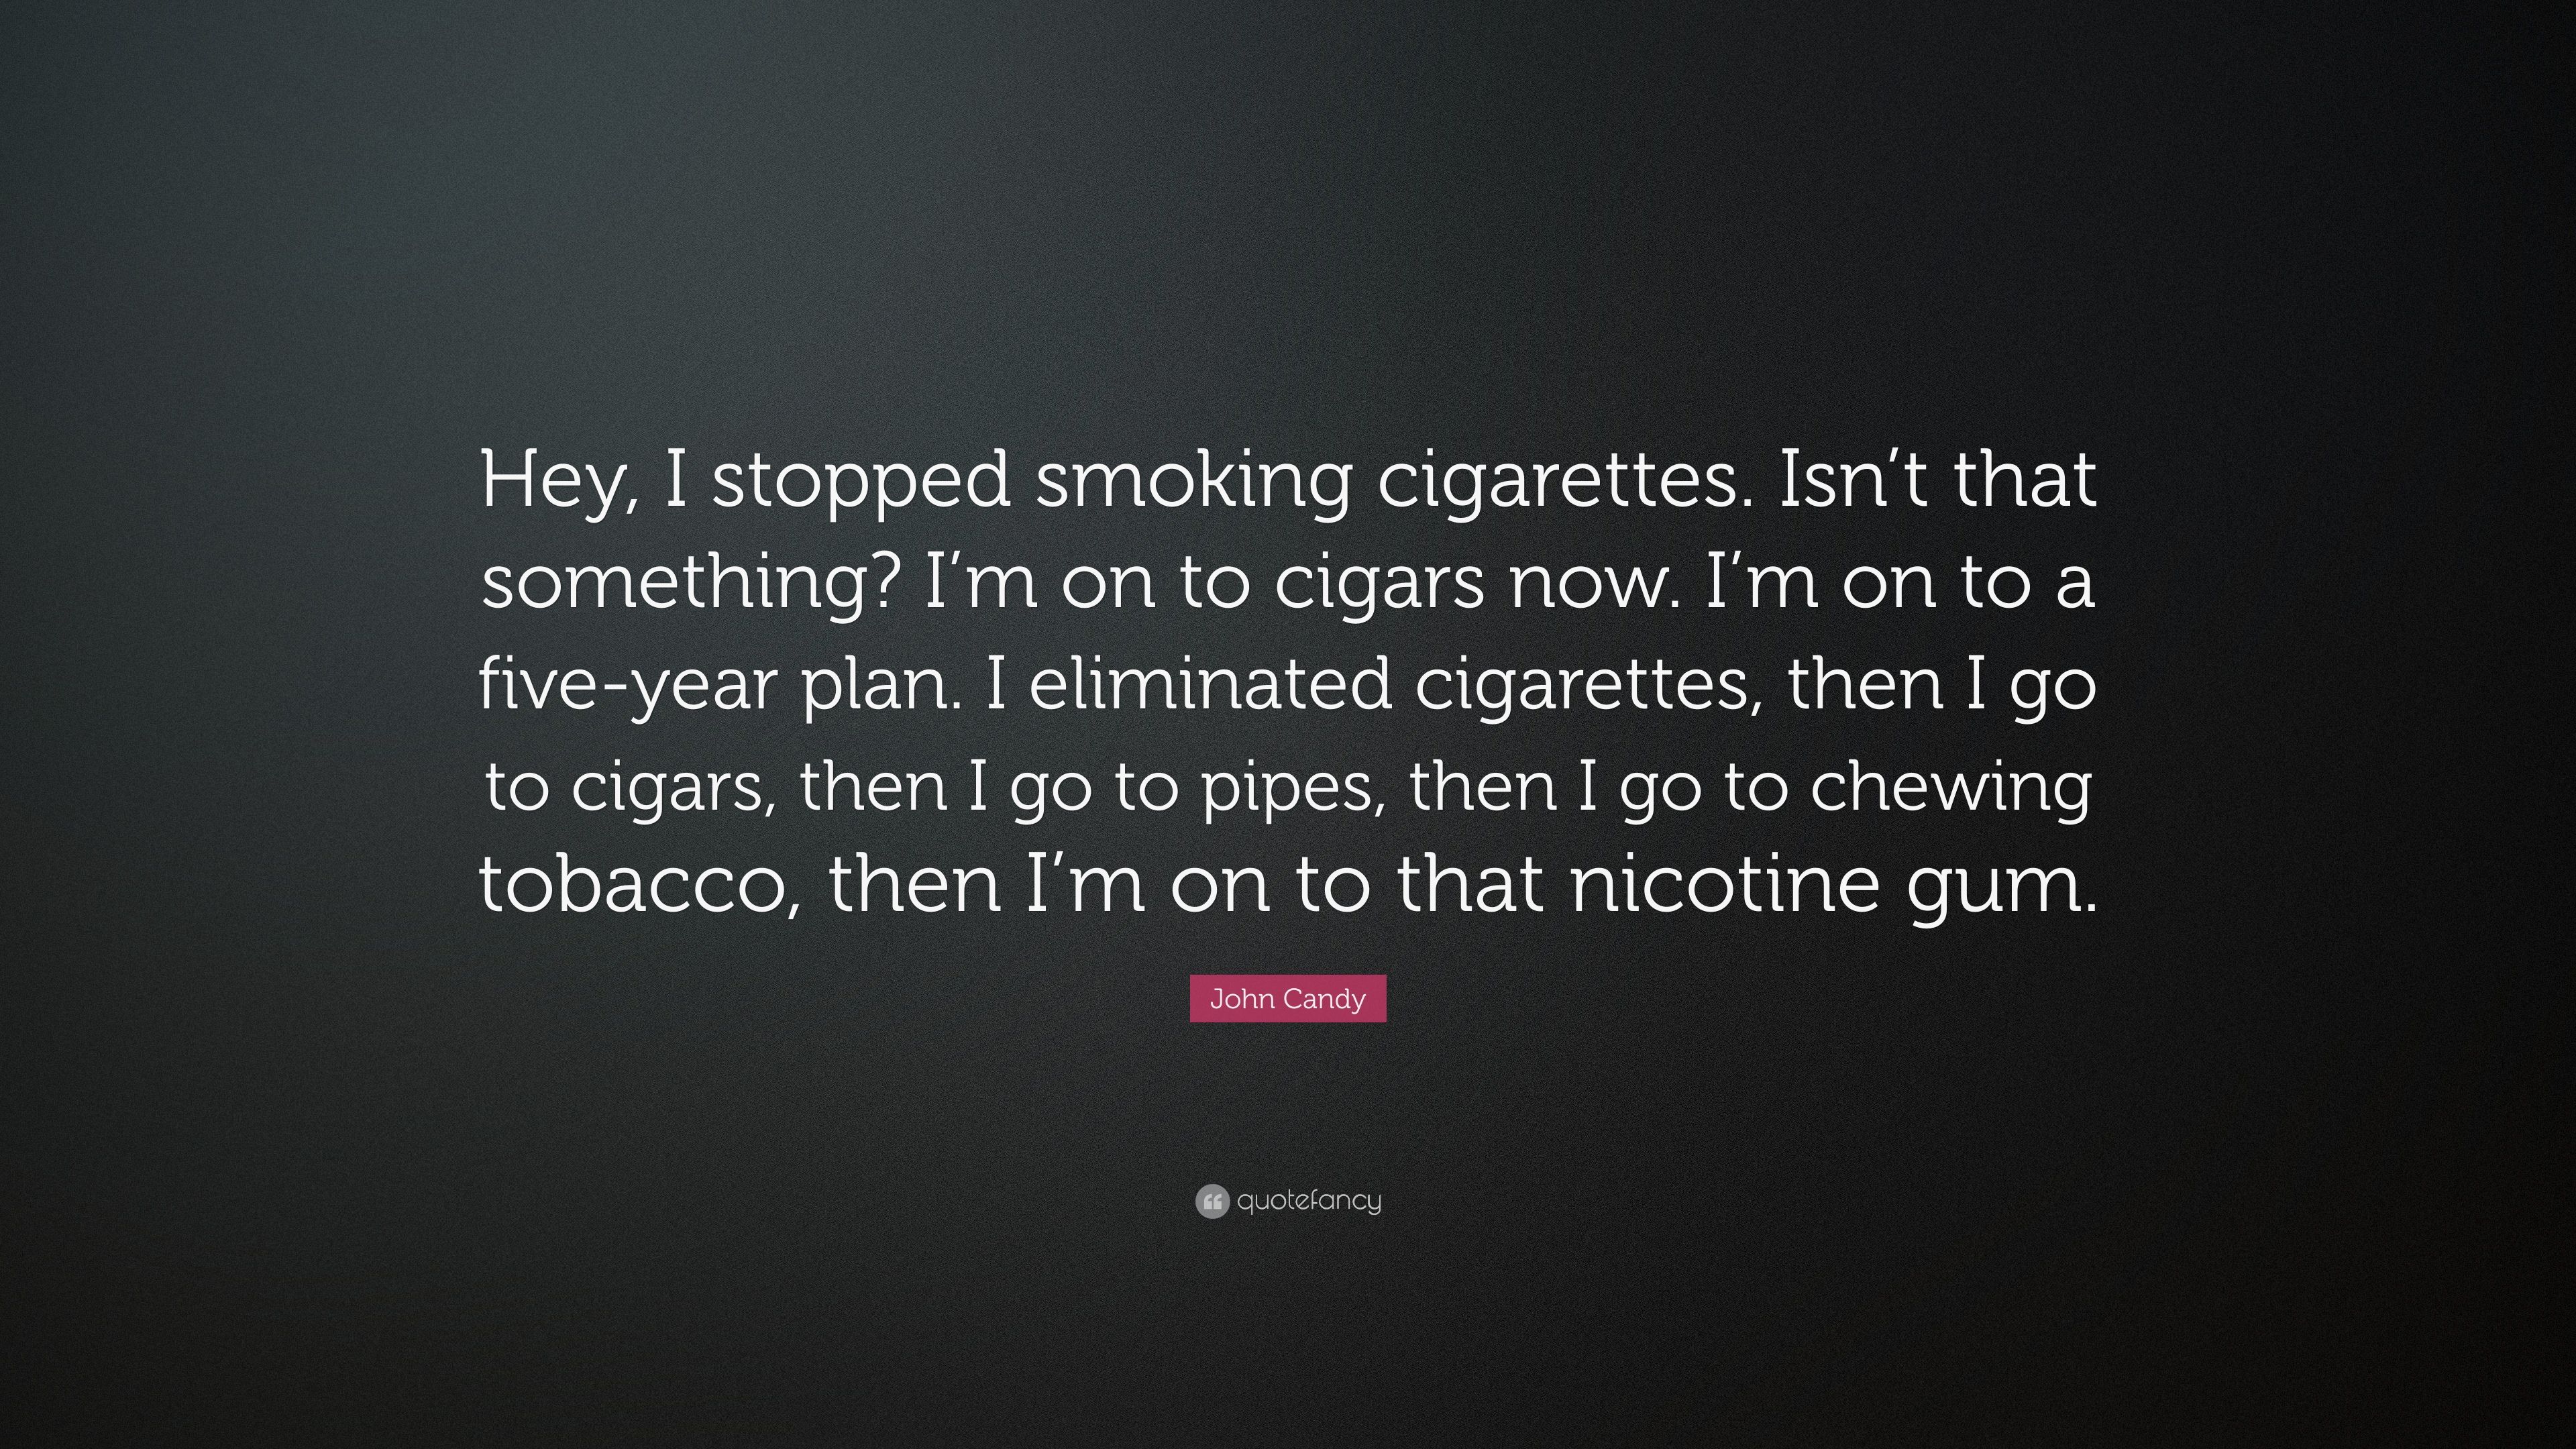 John Candy Quote: “Hey, I stopped smoking cigarettes. Isn't that